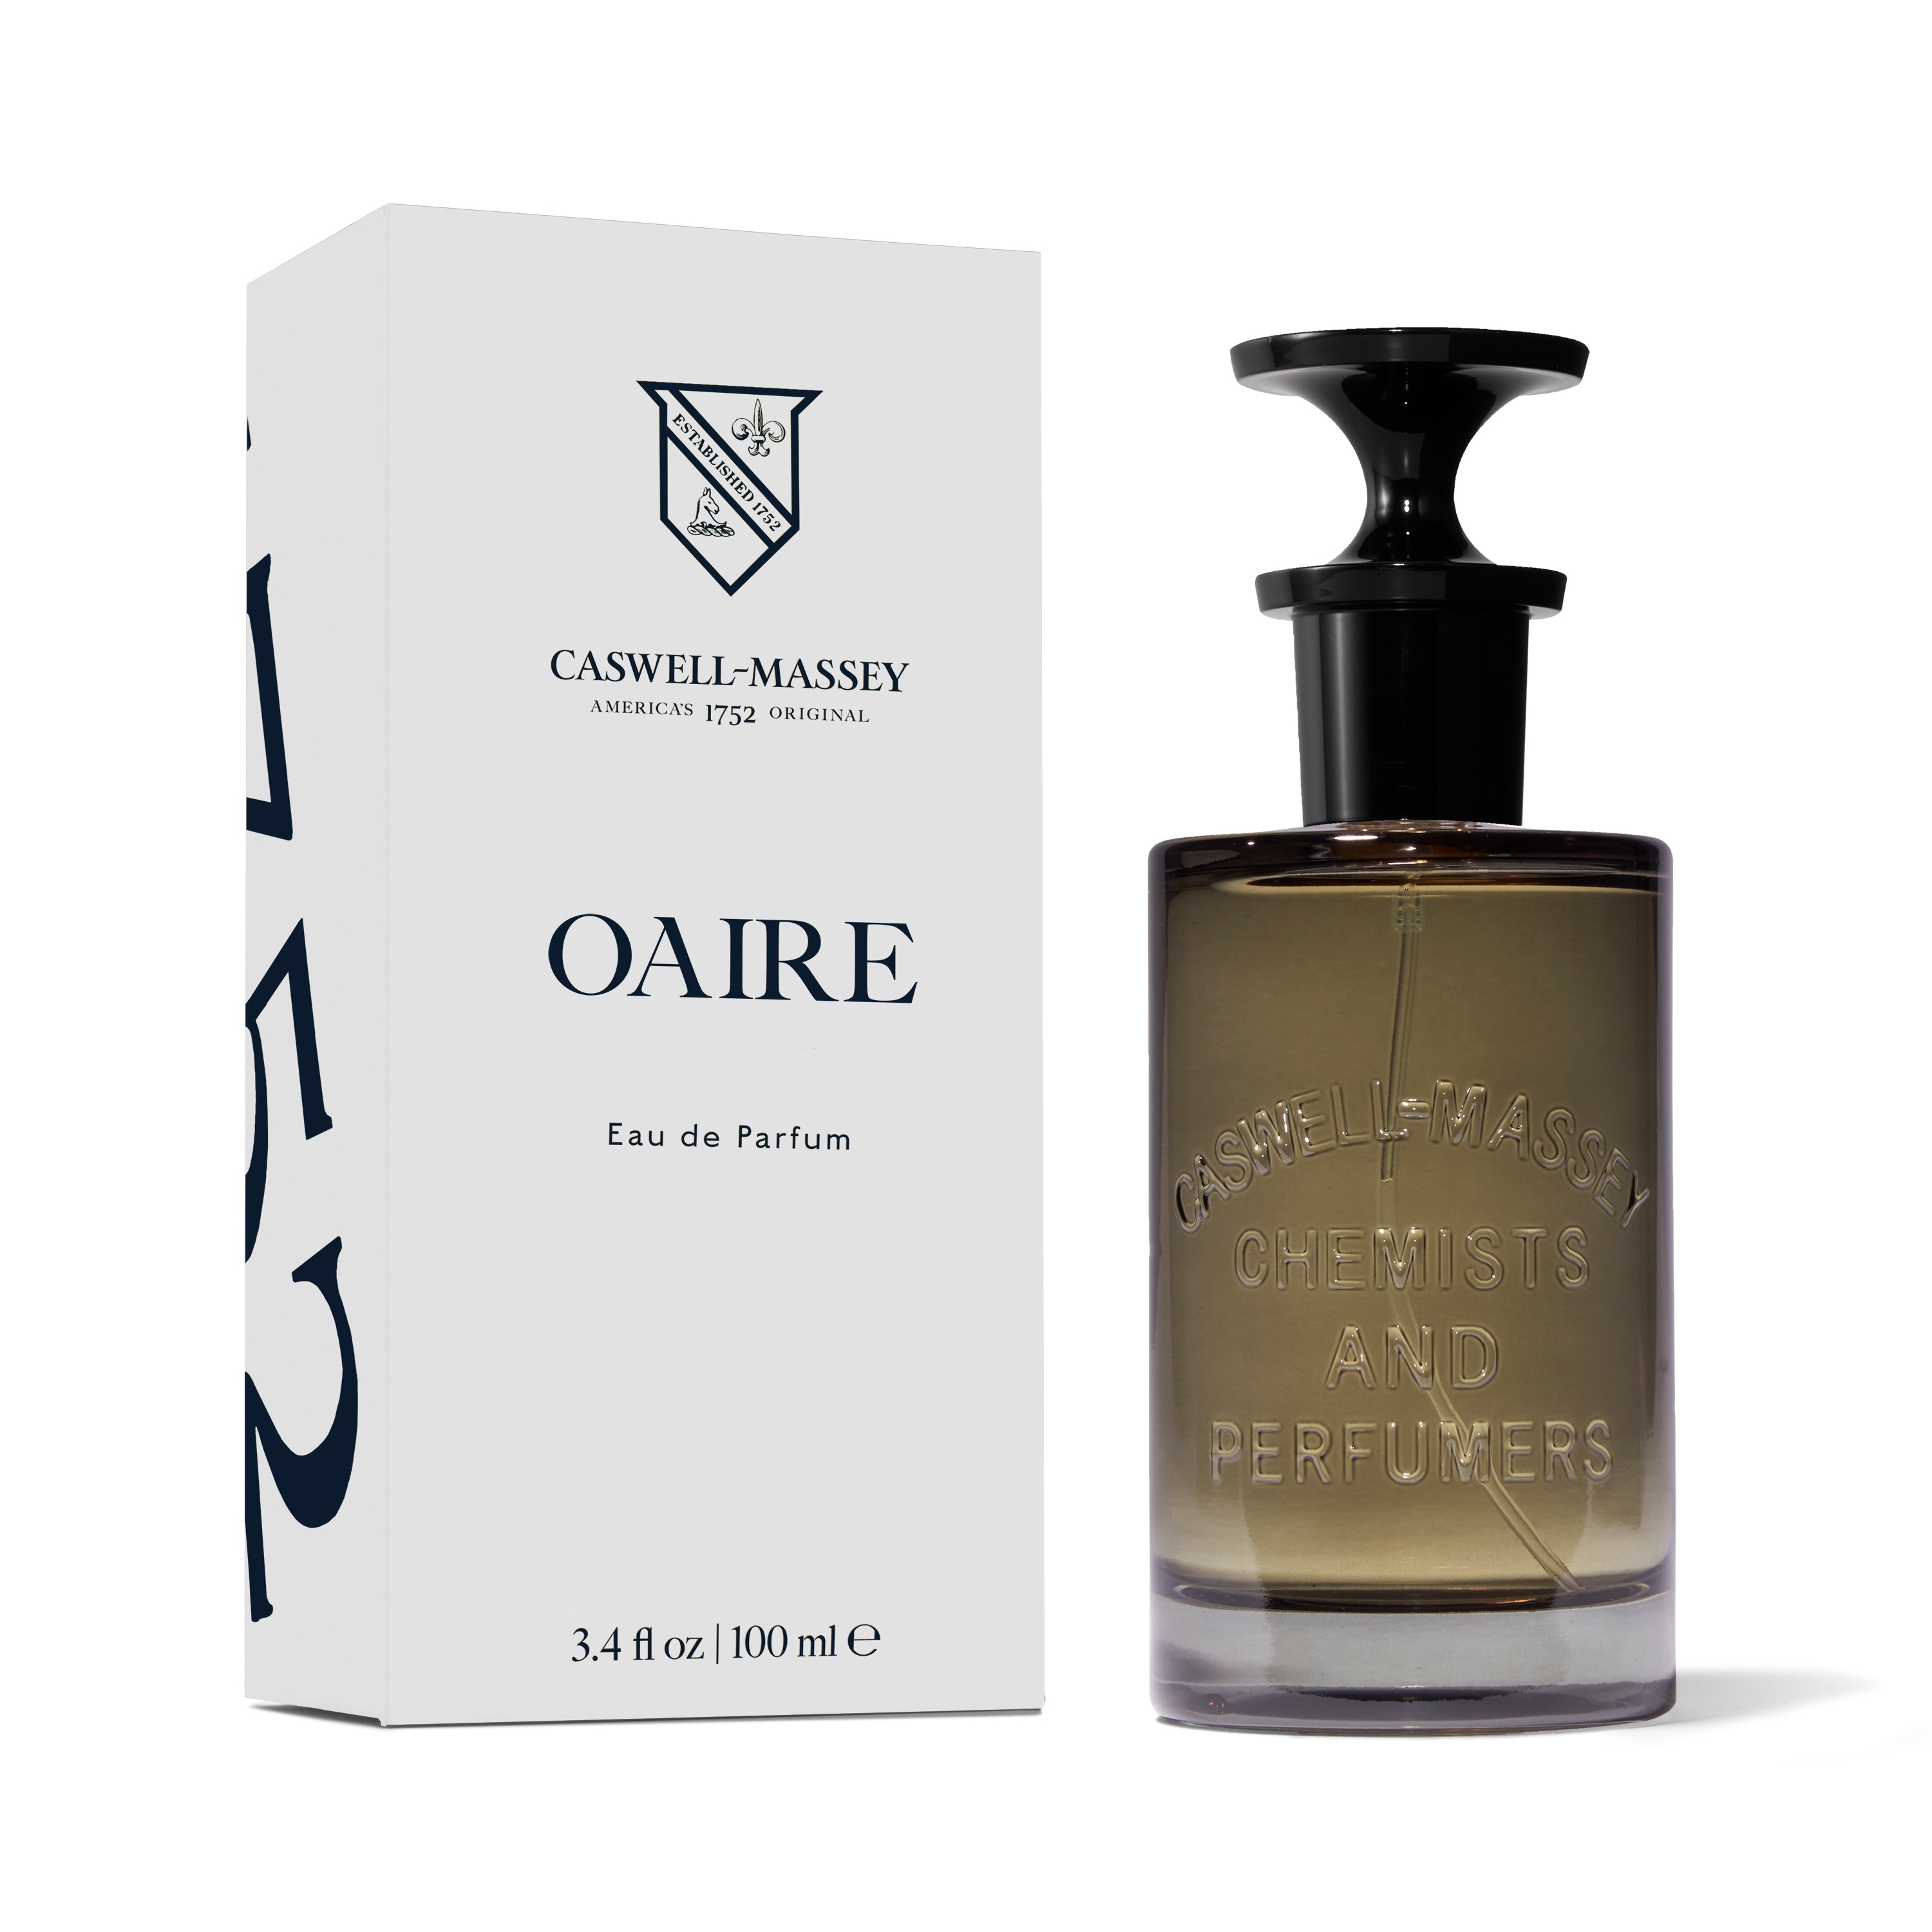 OAIRE EDP by Caswell-Massey 100mL Full Size